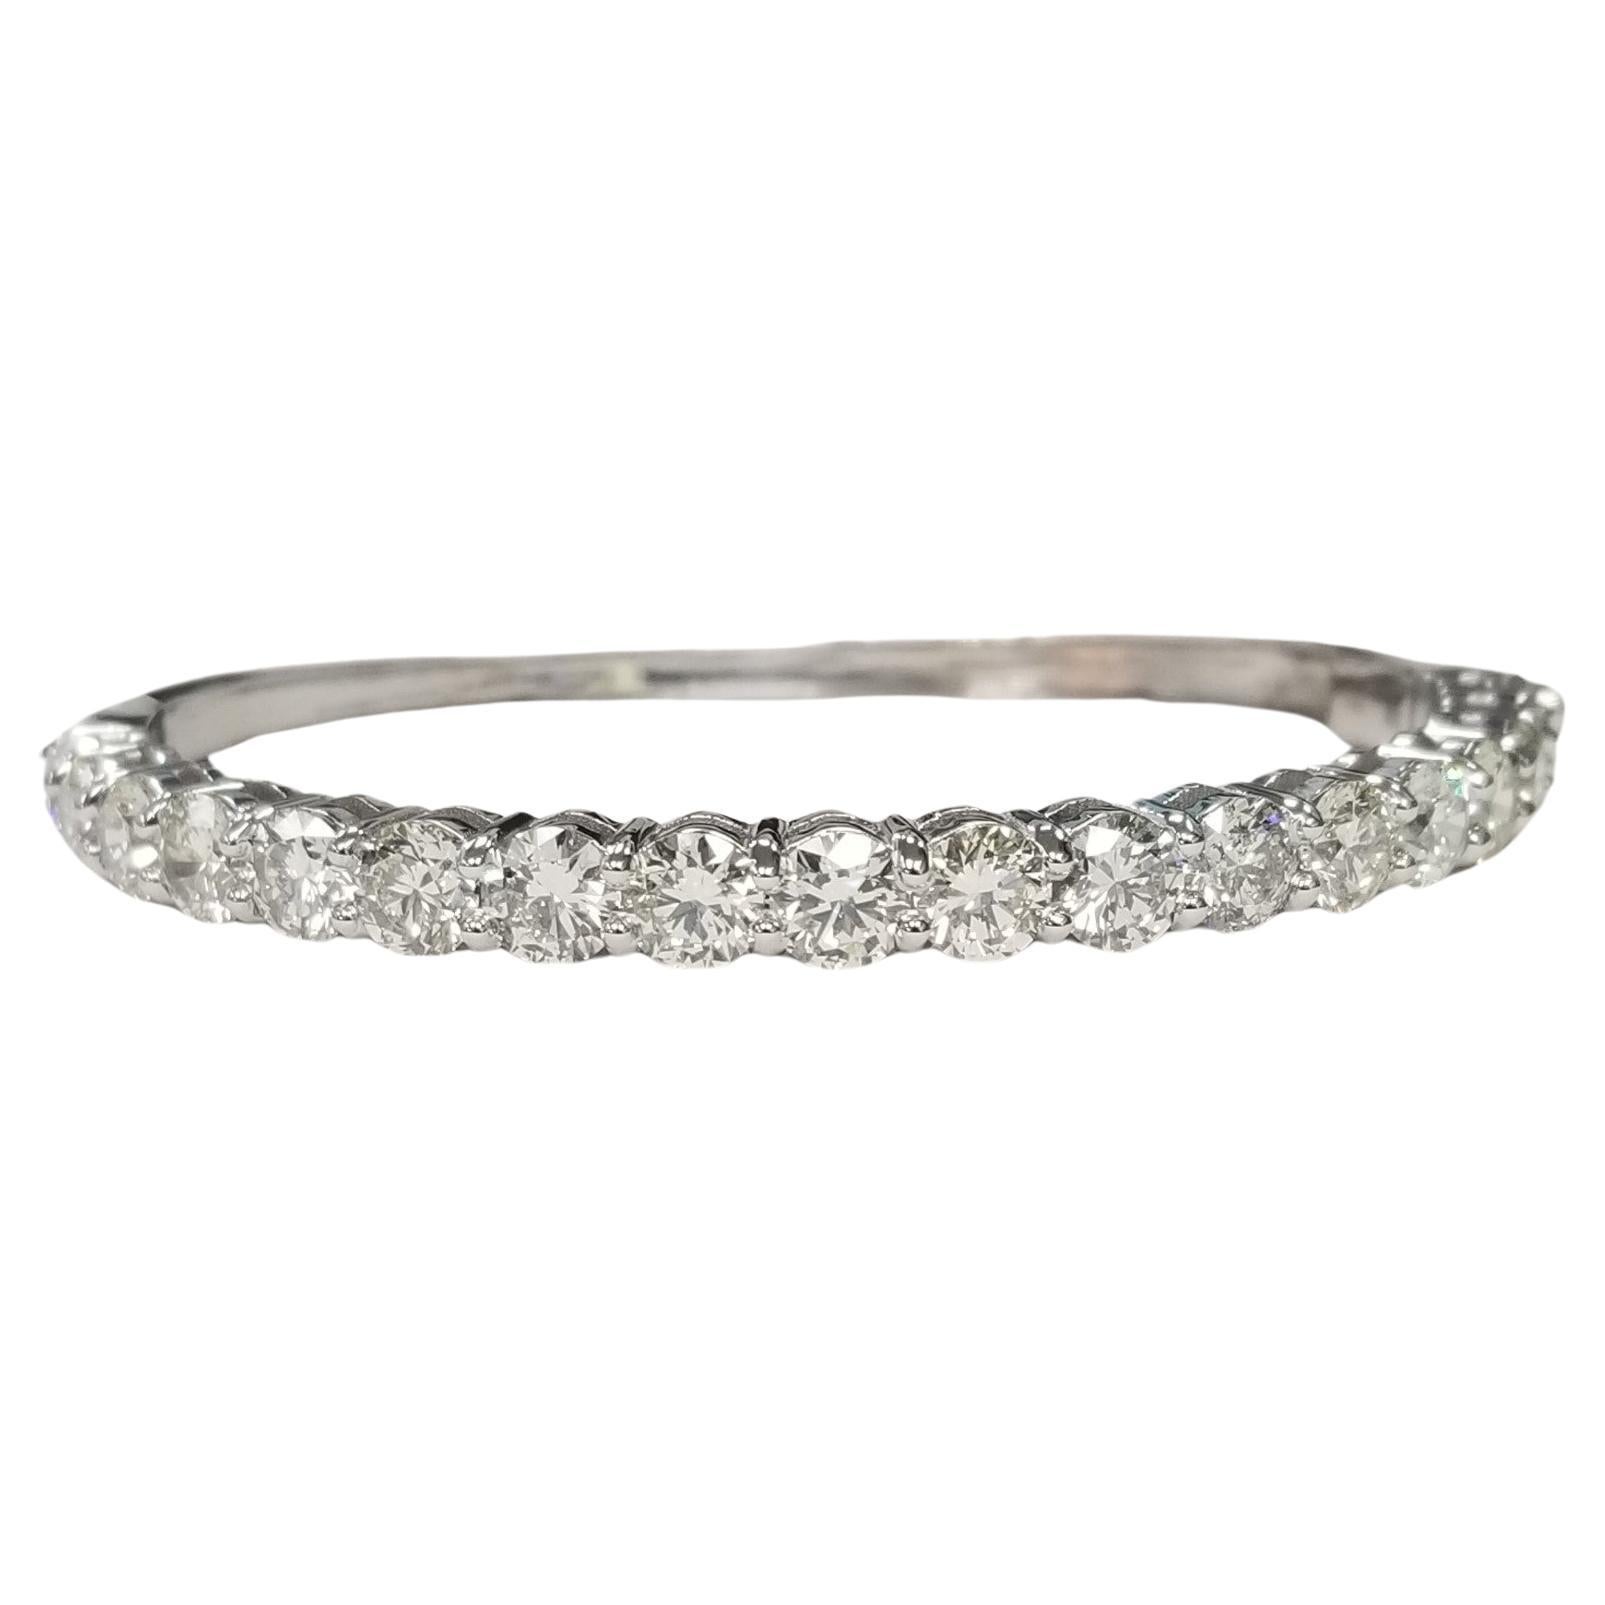 Gorgeous 14k White Gold Diamond "Bangle" Bracelet Weighing 9.30cts. For Sale